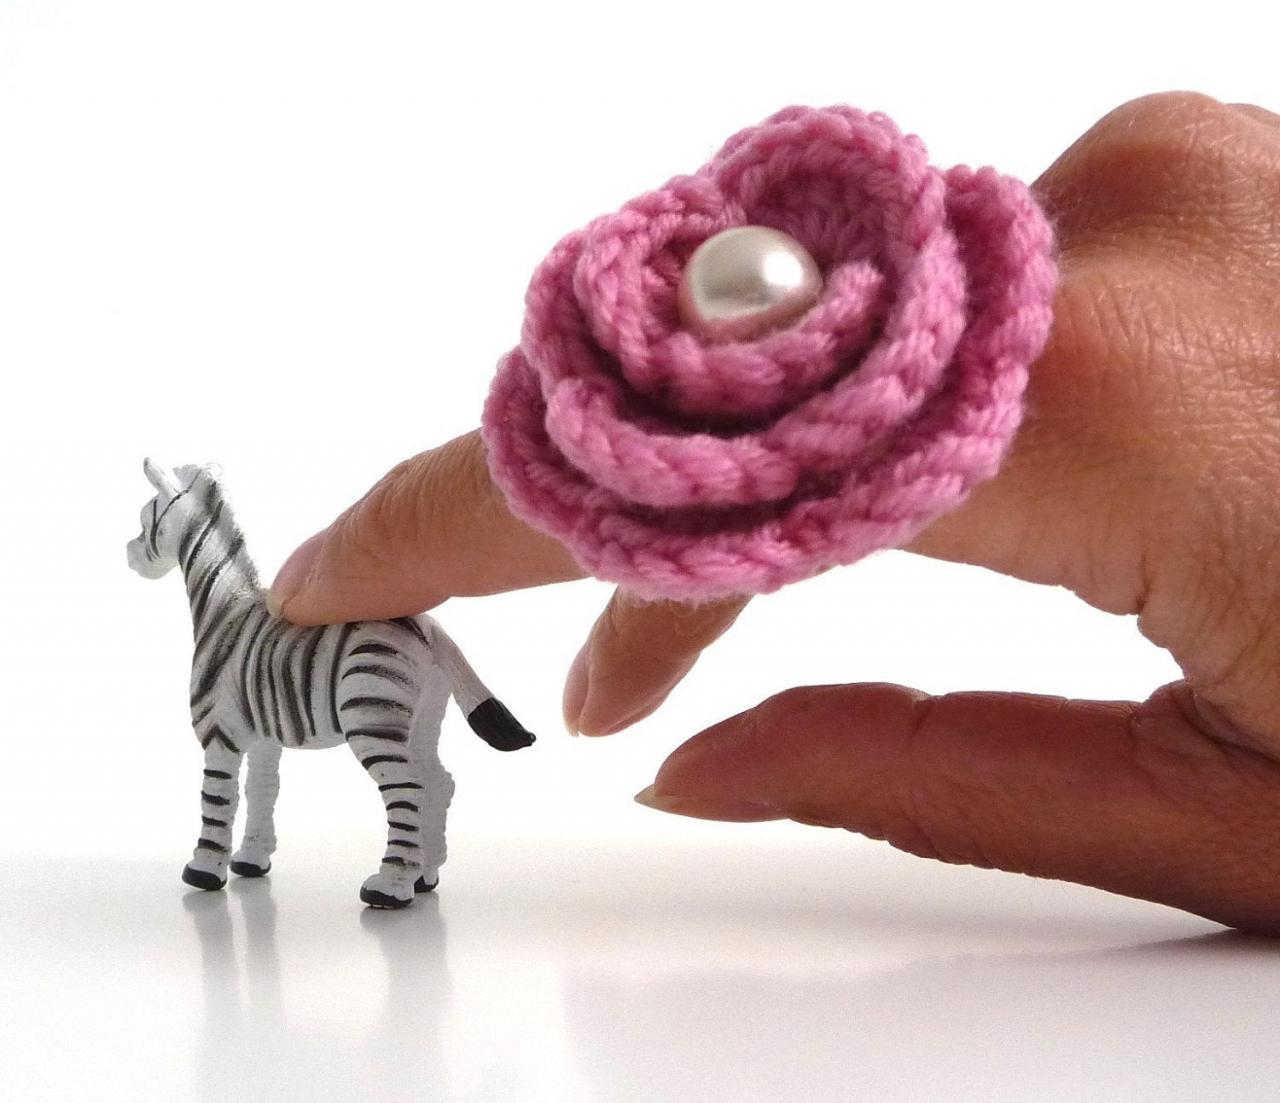 Pink Flower Ring - Crochet Wool Rose, Adjustable, Boho, Statement, Romantic Ring - Bridesmaid, Mothers Day, Anniversary, Valentines Gift